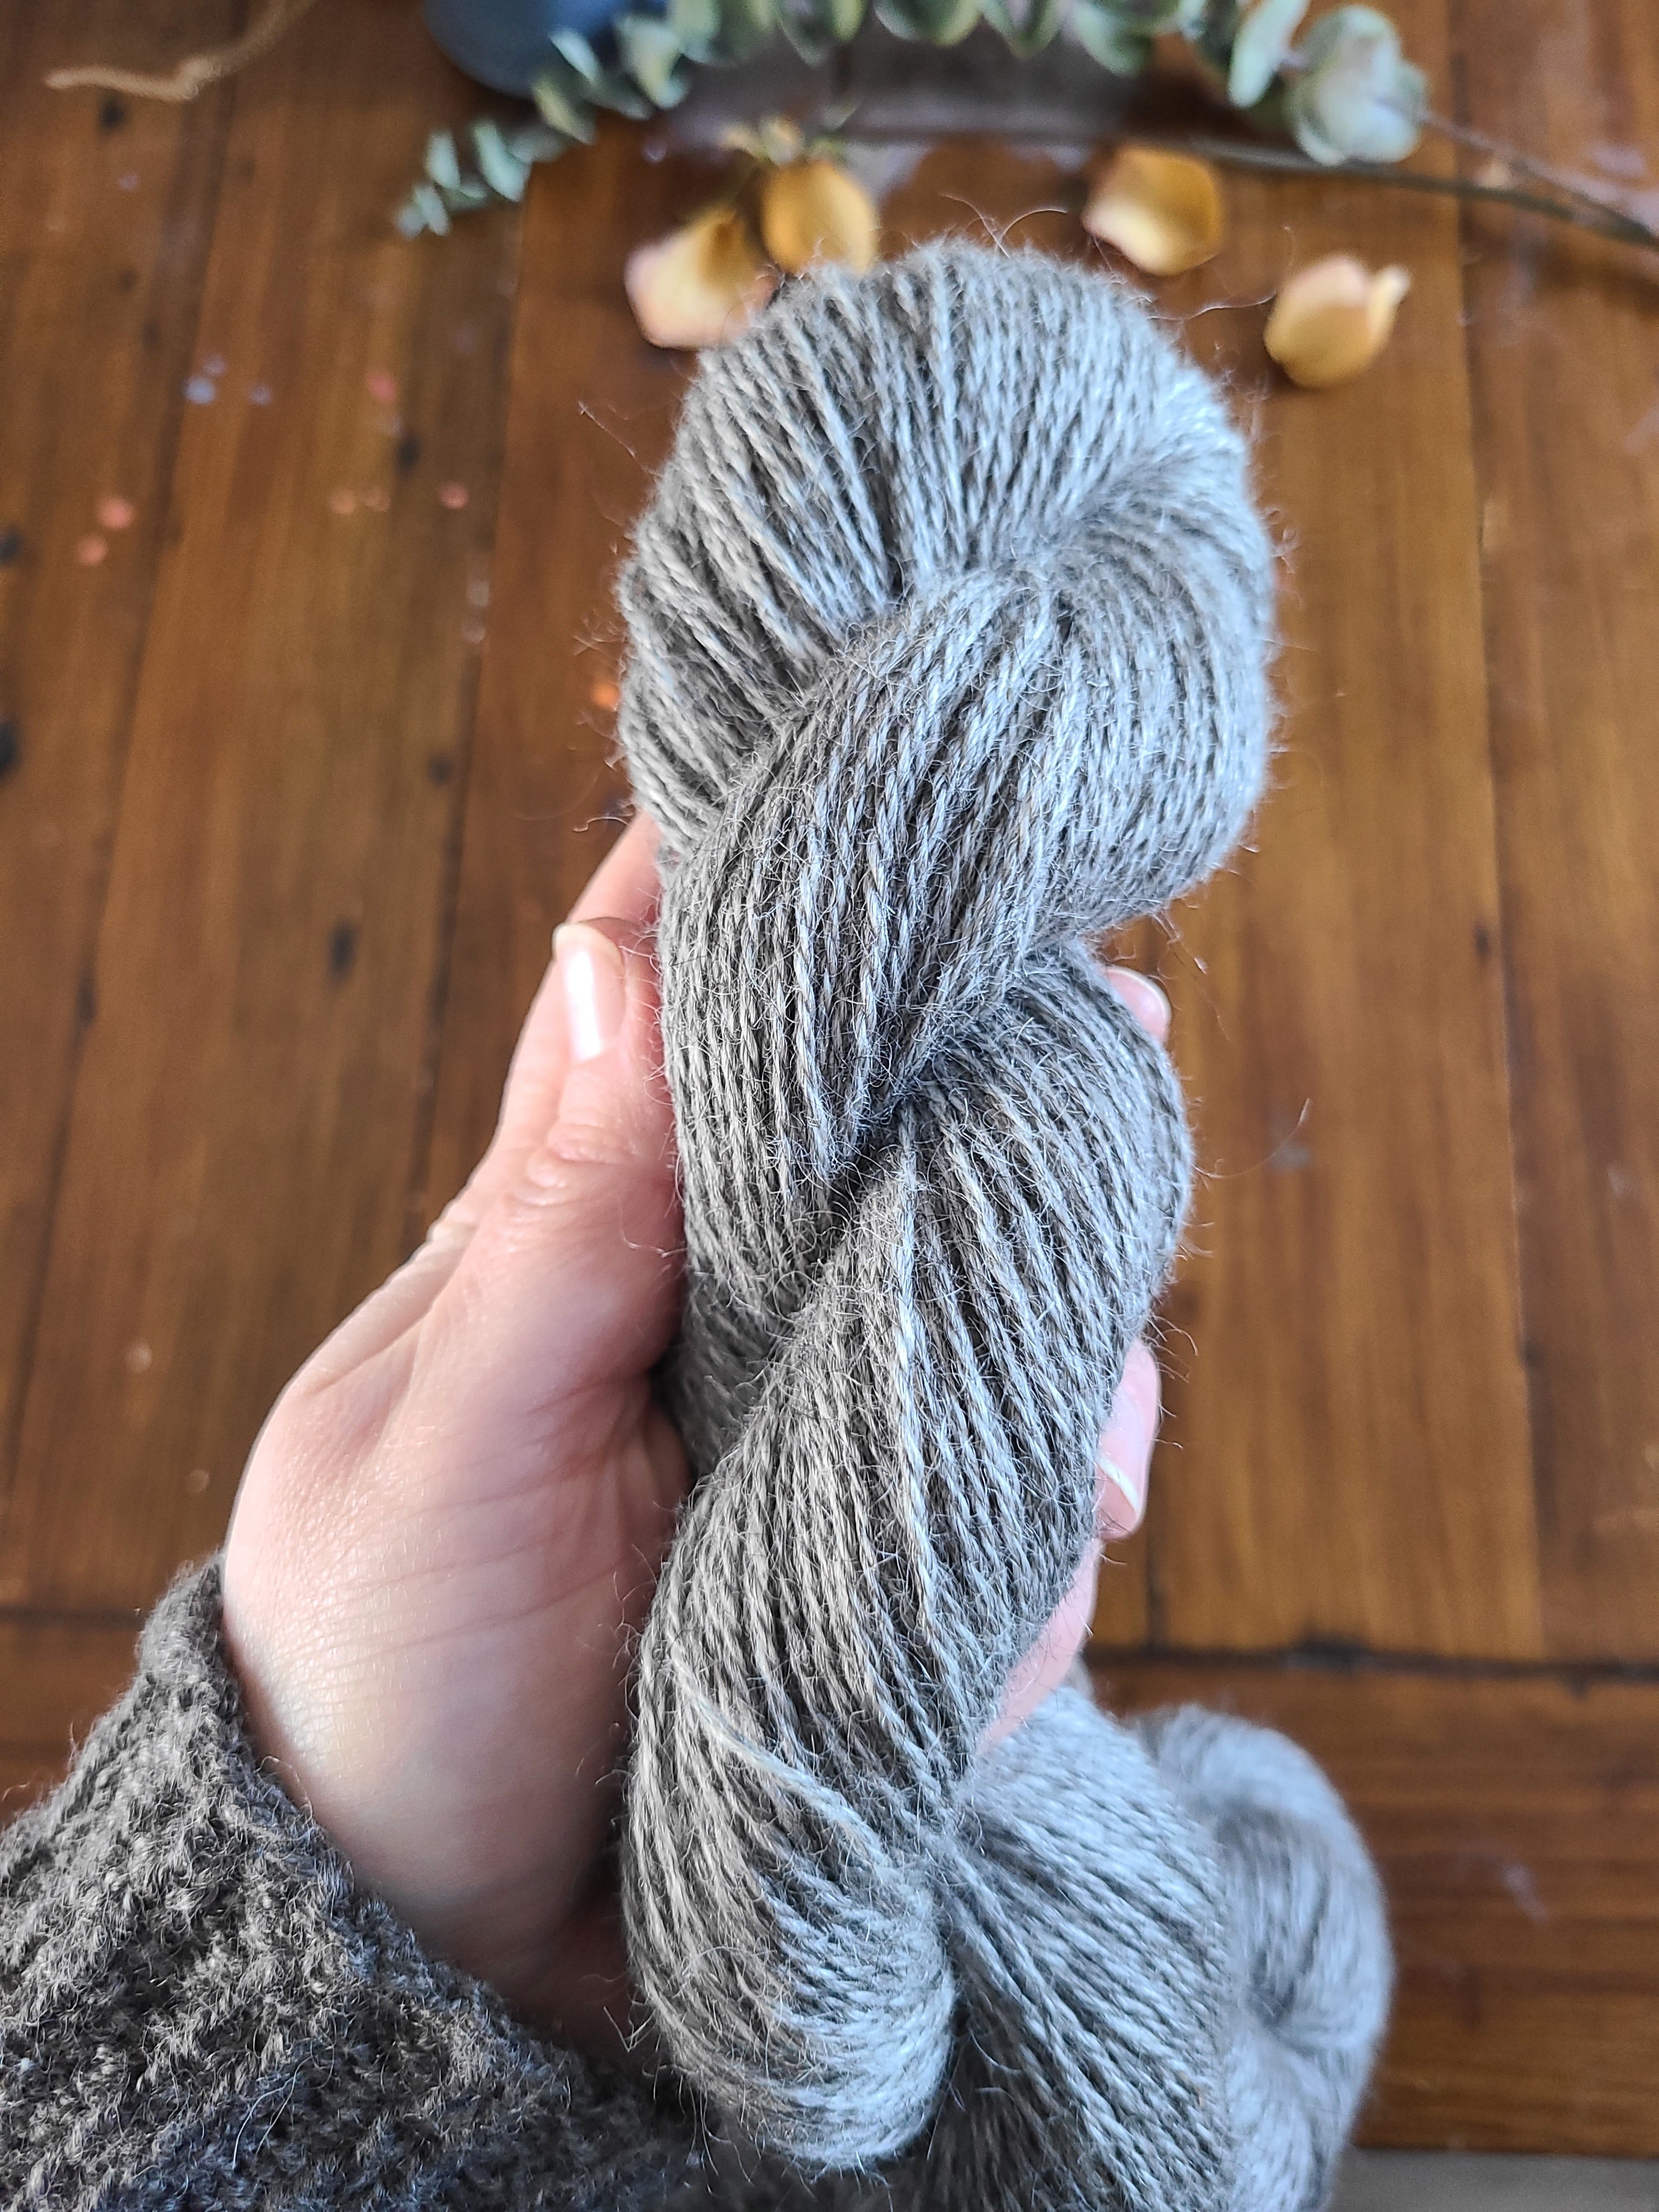 LMW - Ash & Frost - Fingering Weight - 3 ply